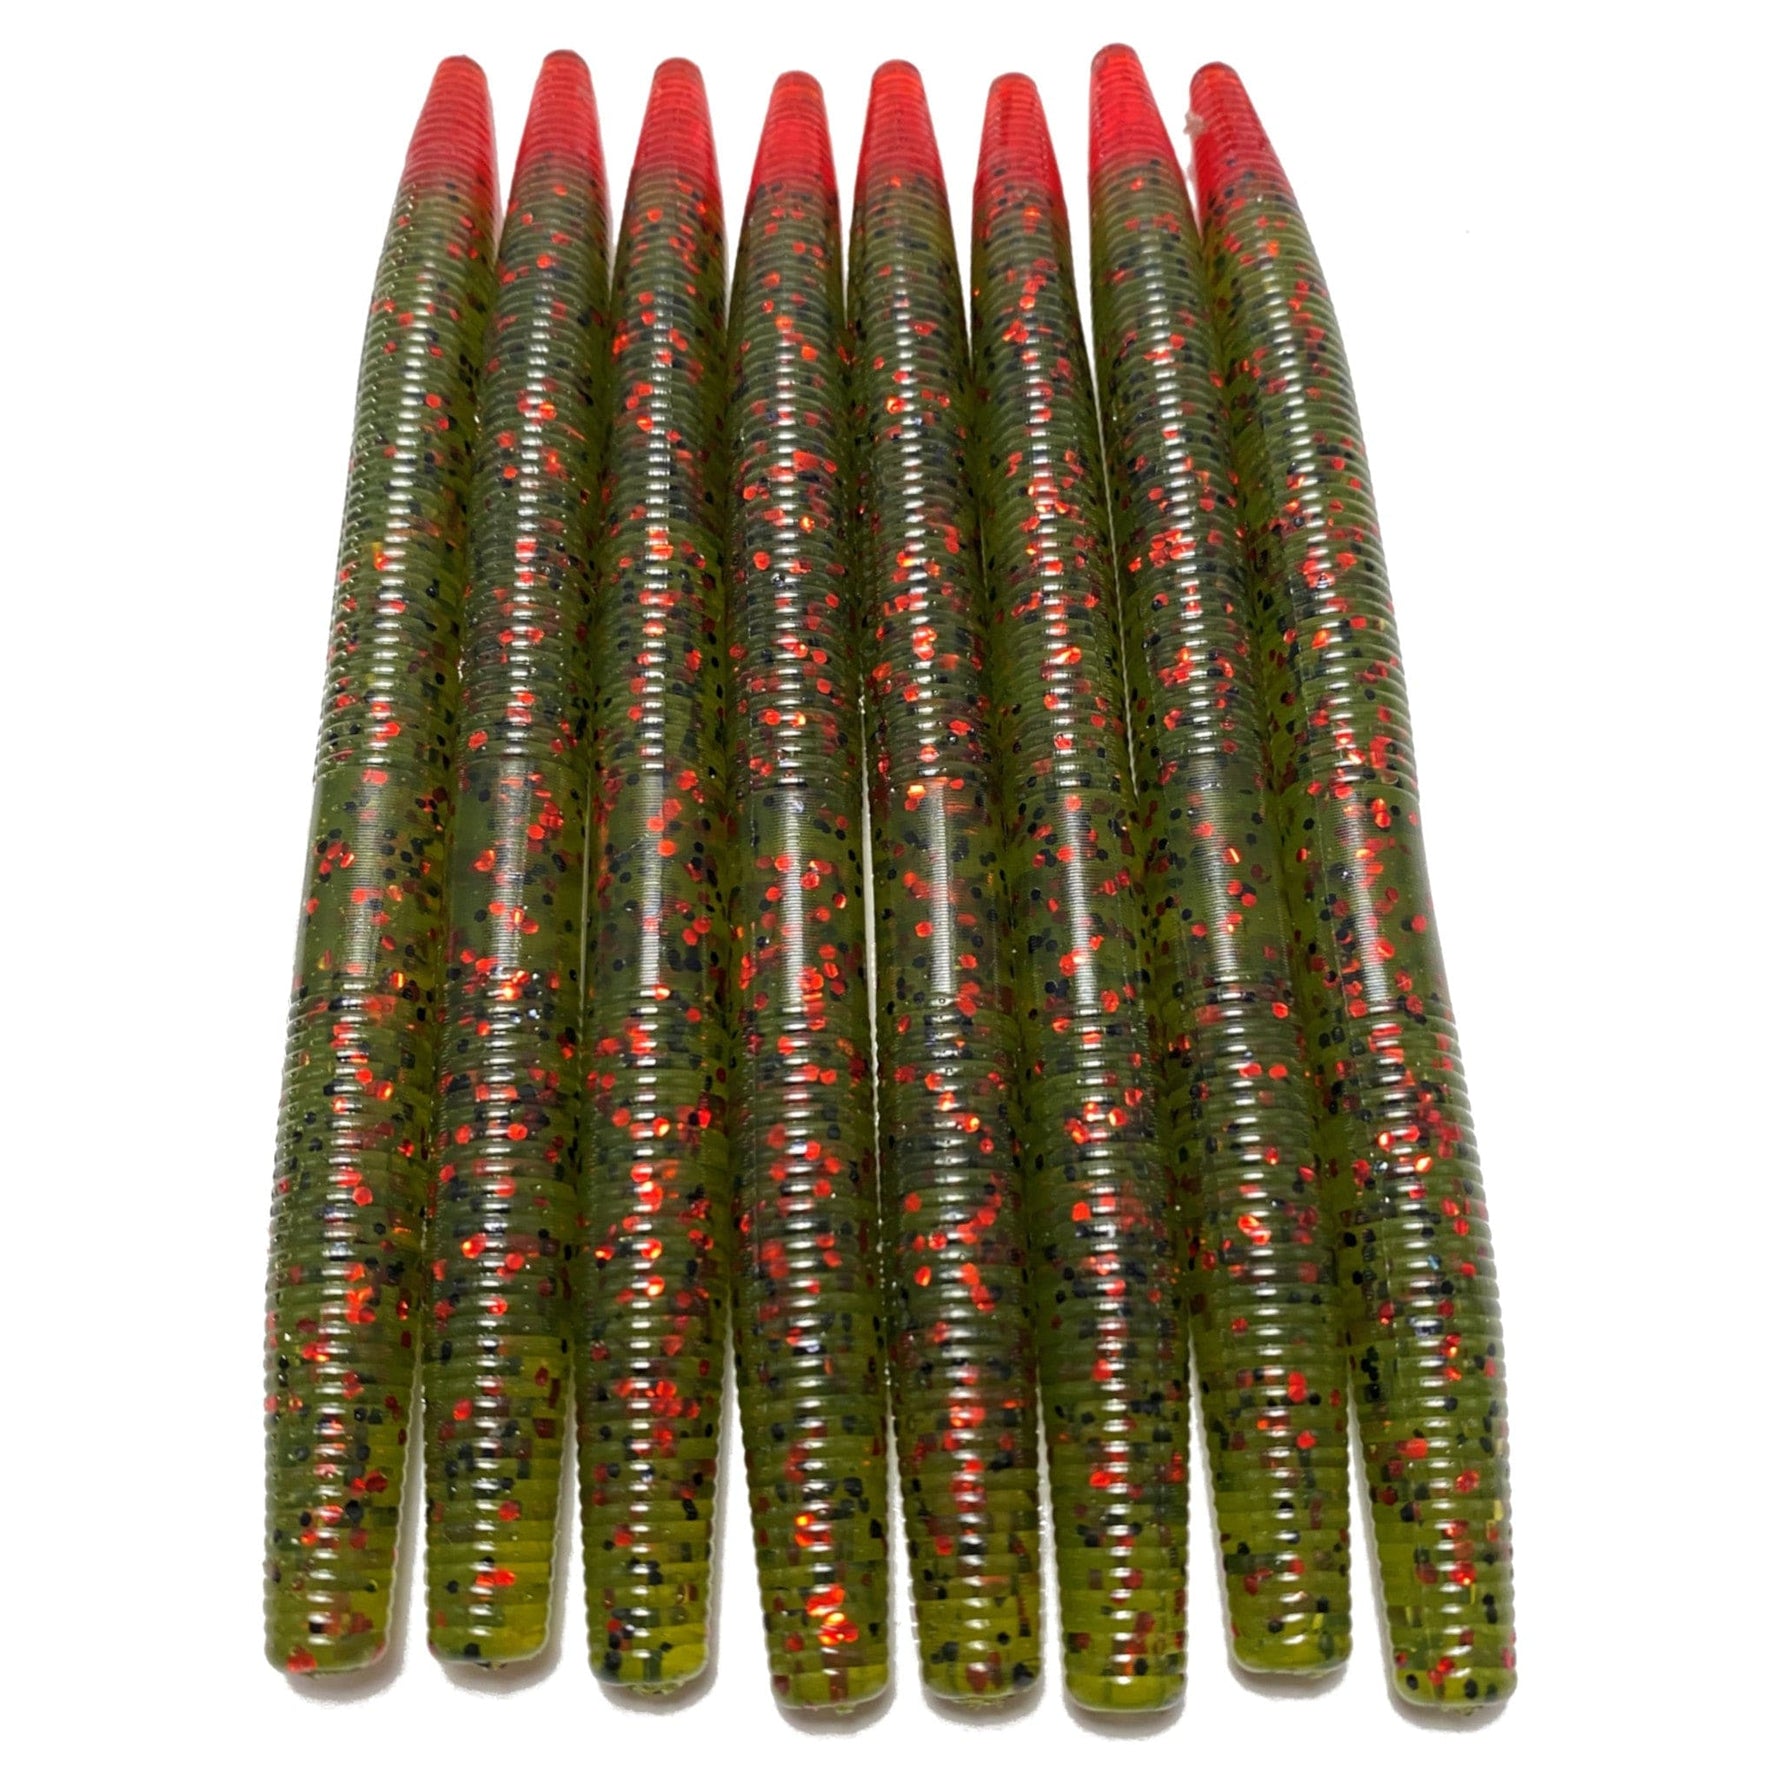 https://obeebaits.com/cdn/shop/products/obee-stick-worm-watermelon-red-tip-fishing-baits-lures-978.jpg?v=1699034169&width=1780